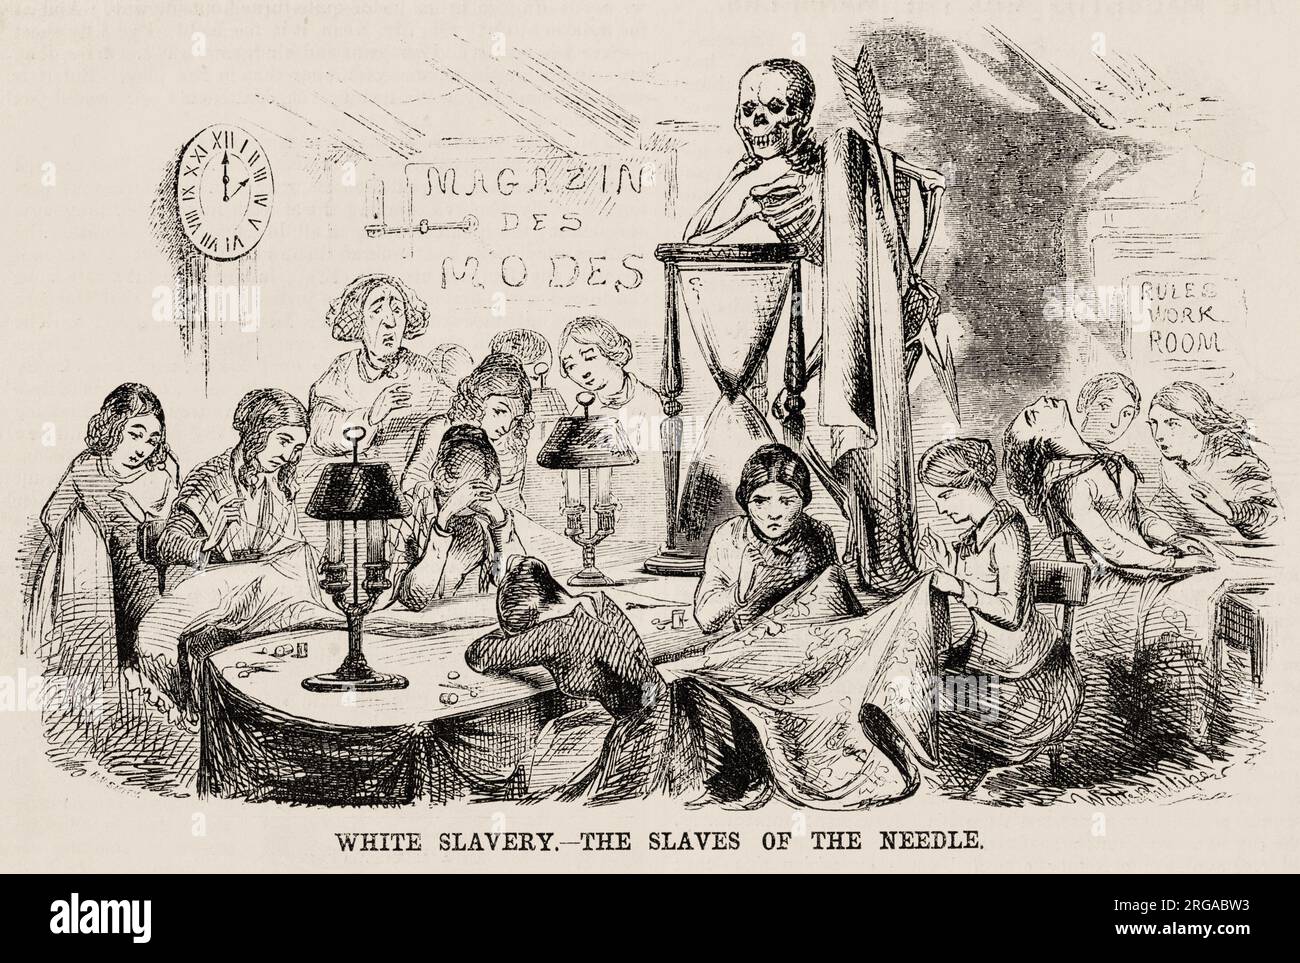 White Slavery - the slaves of the needle. Poor exhausted Victorian needlewomen work round the clock sewing clothes for the garment industry, while the figure of Death as a skeleton with an hourglass watches over them. Stock Photo